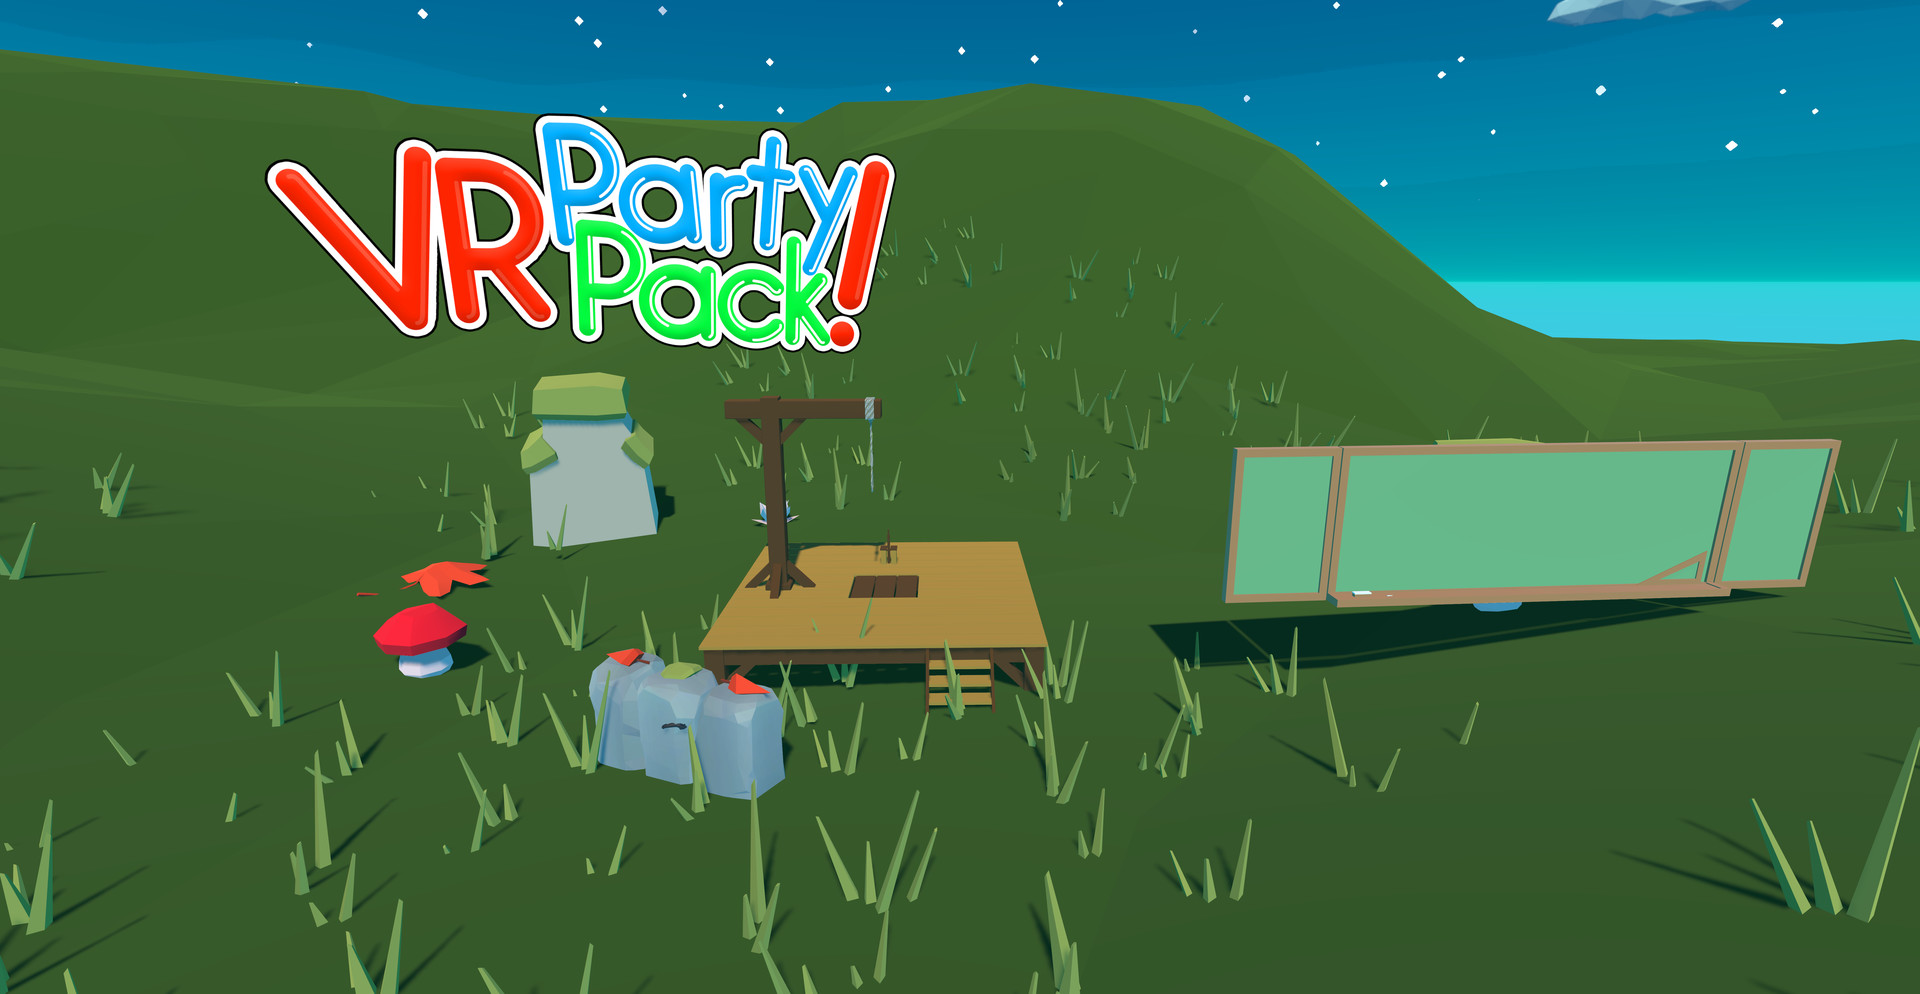 VR Party Pack Free Download